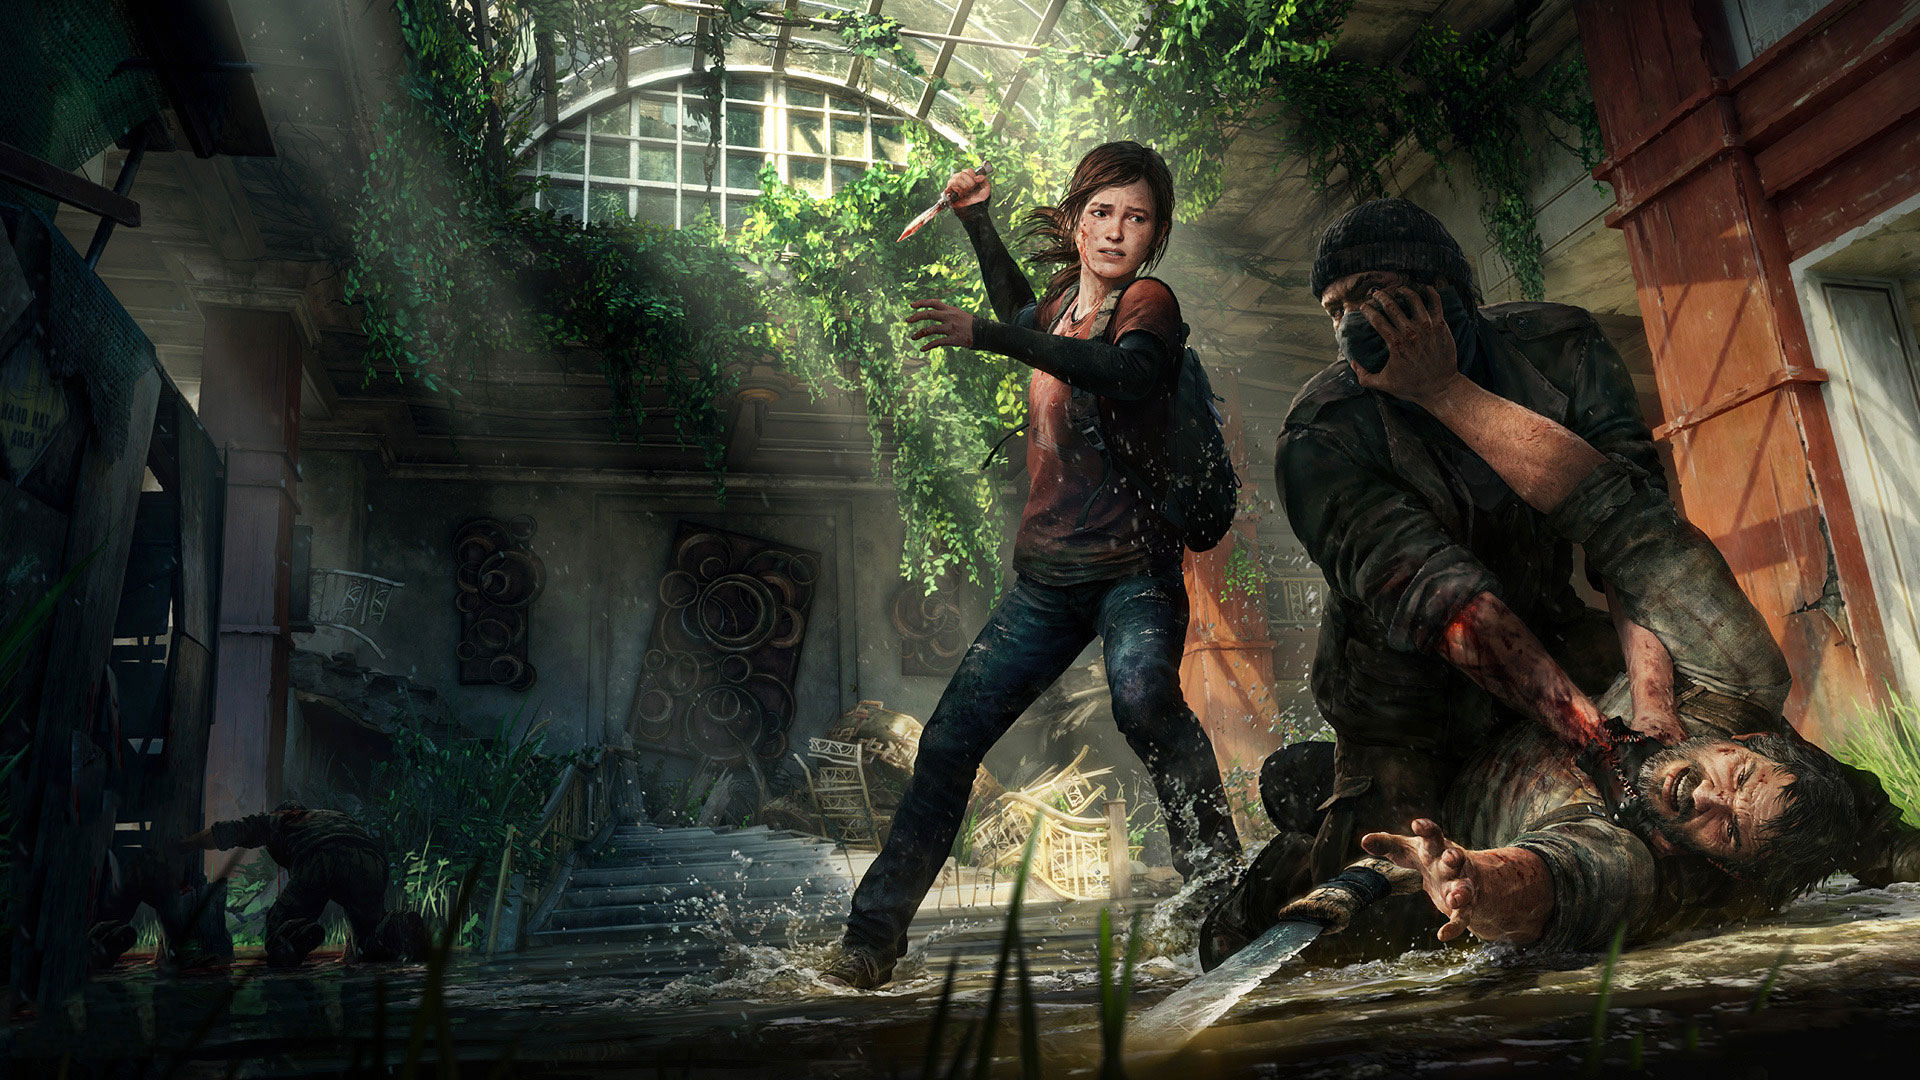 Love and zombies: A closer look at 'The Last of Us' - The Signal